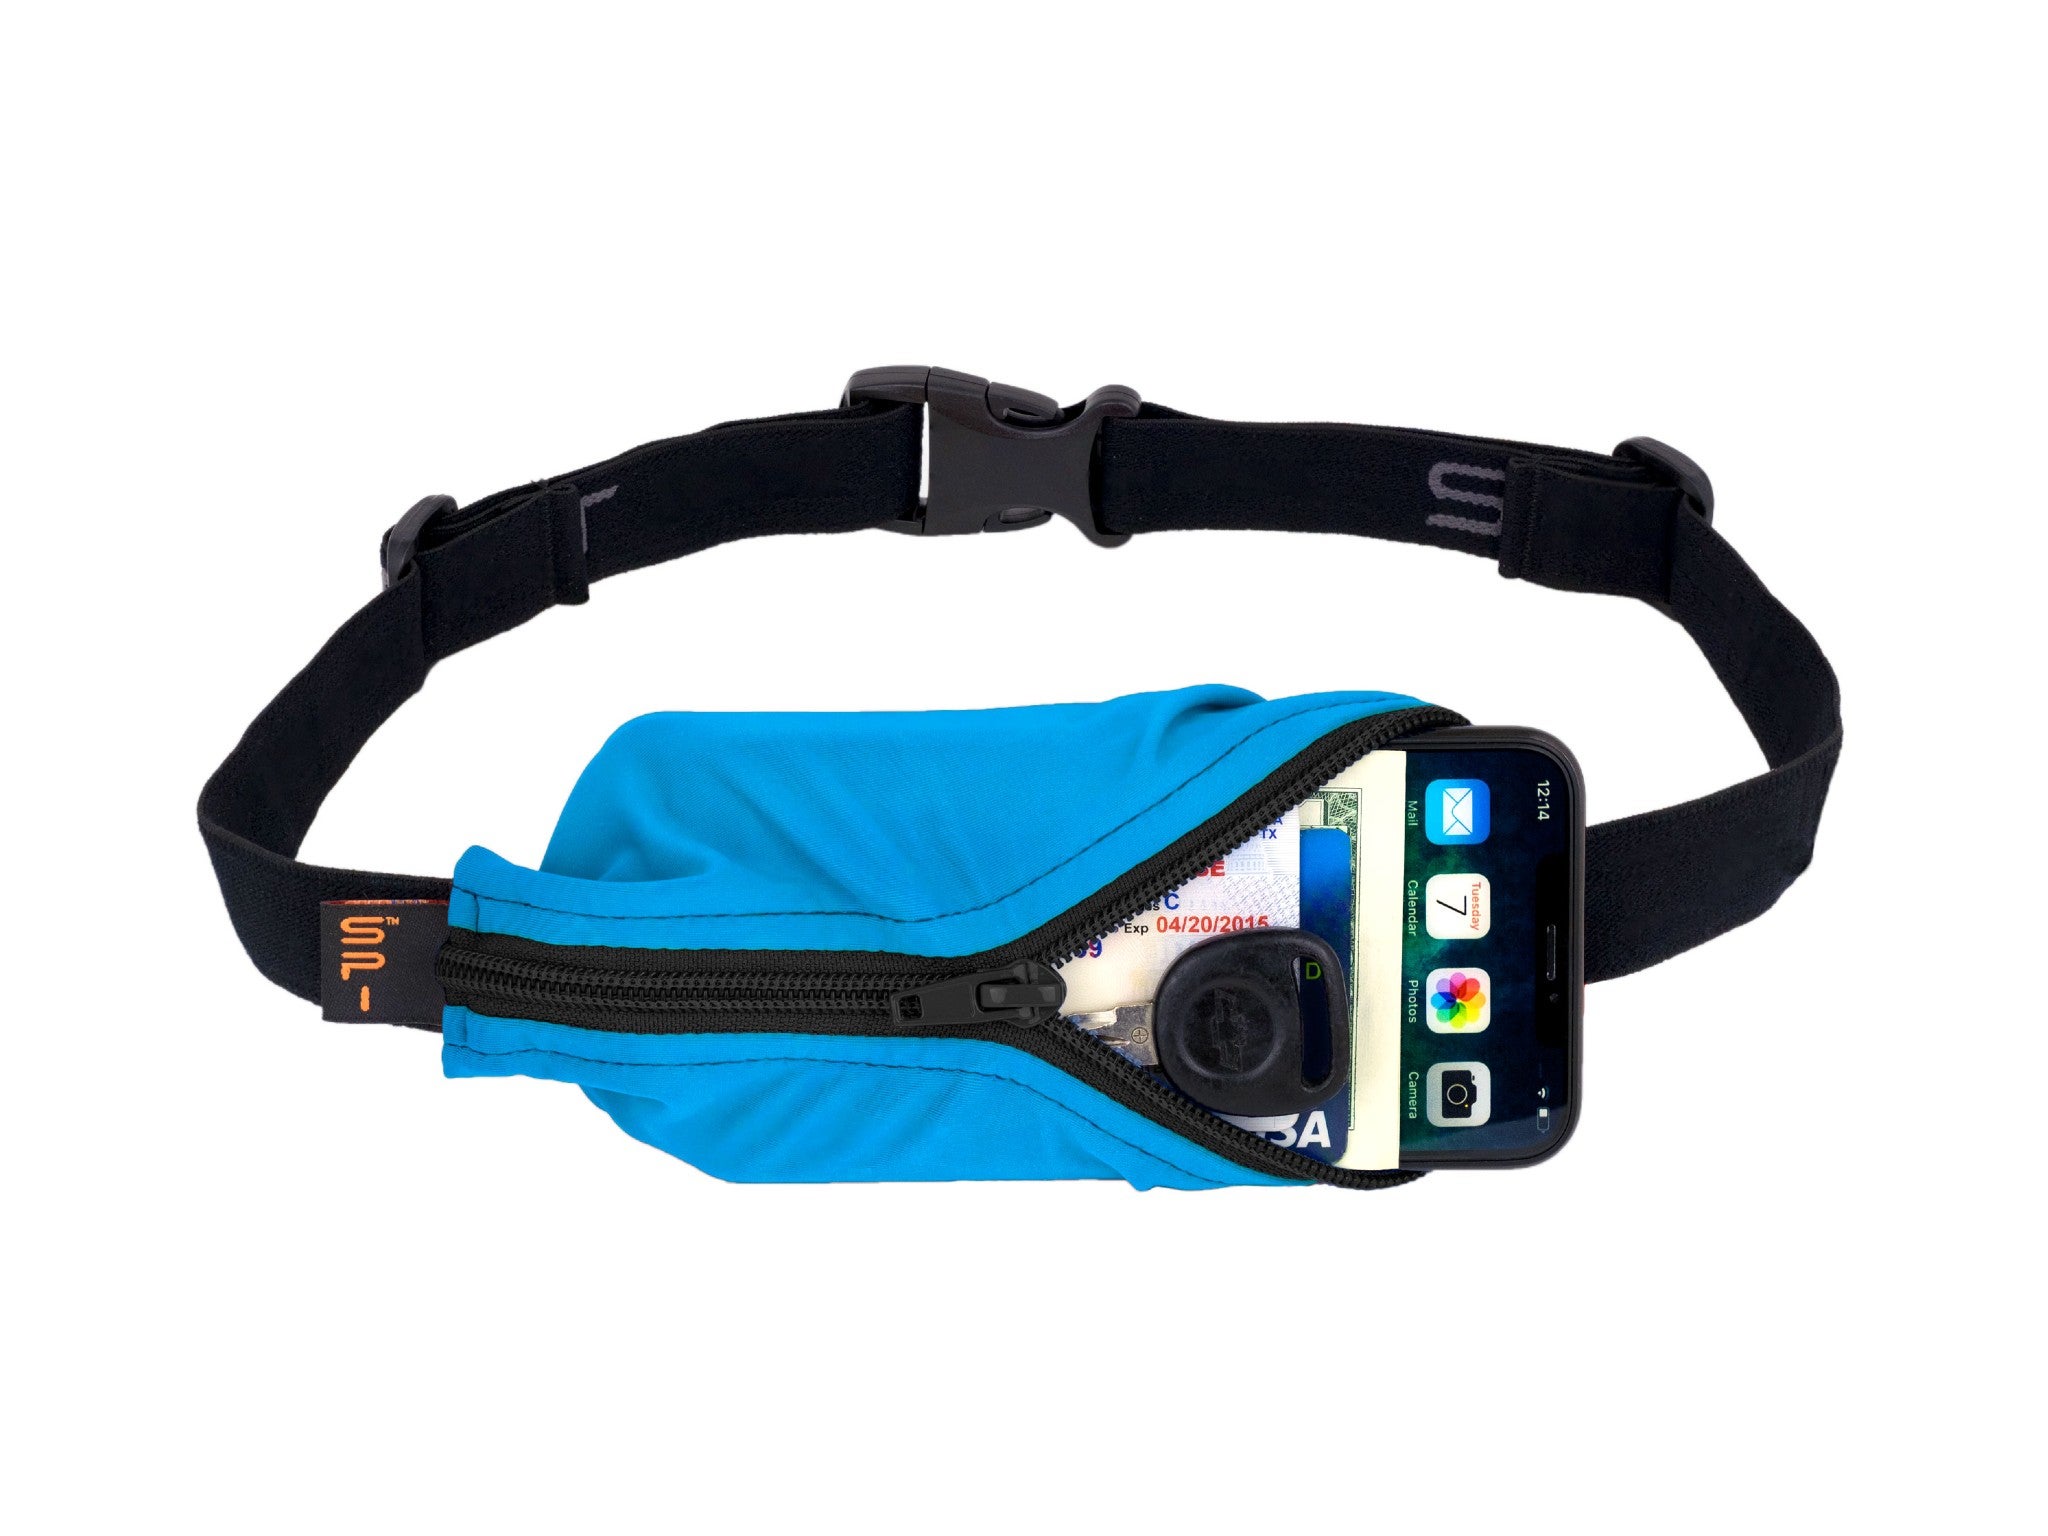 running waist bag can carry water bottles adjustable running belt is suitable for storing mobile phones keys and other small items while running Running waist belt 